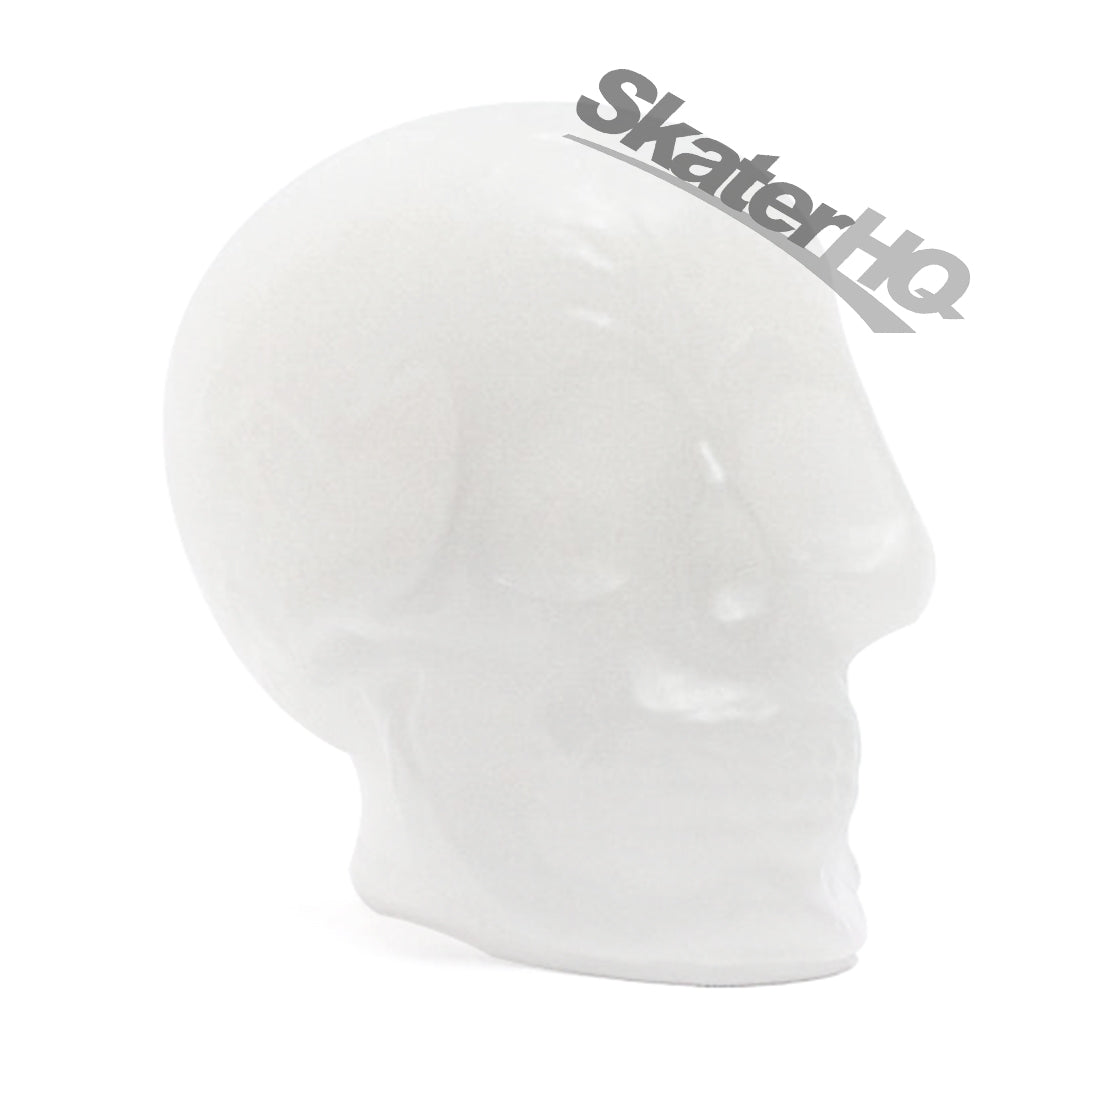 Andale Skull Wax - White Skateboard Accessories